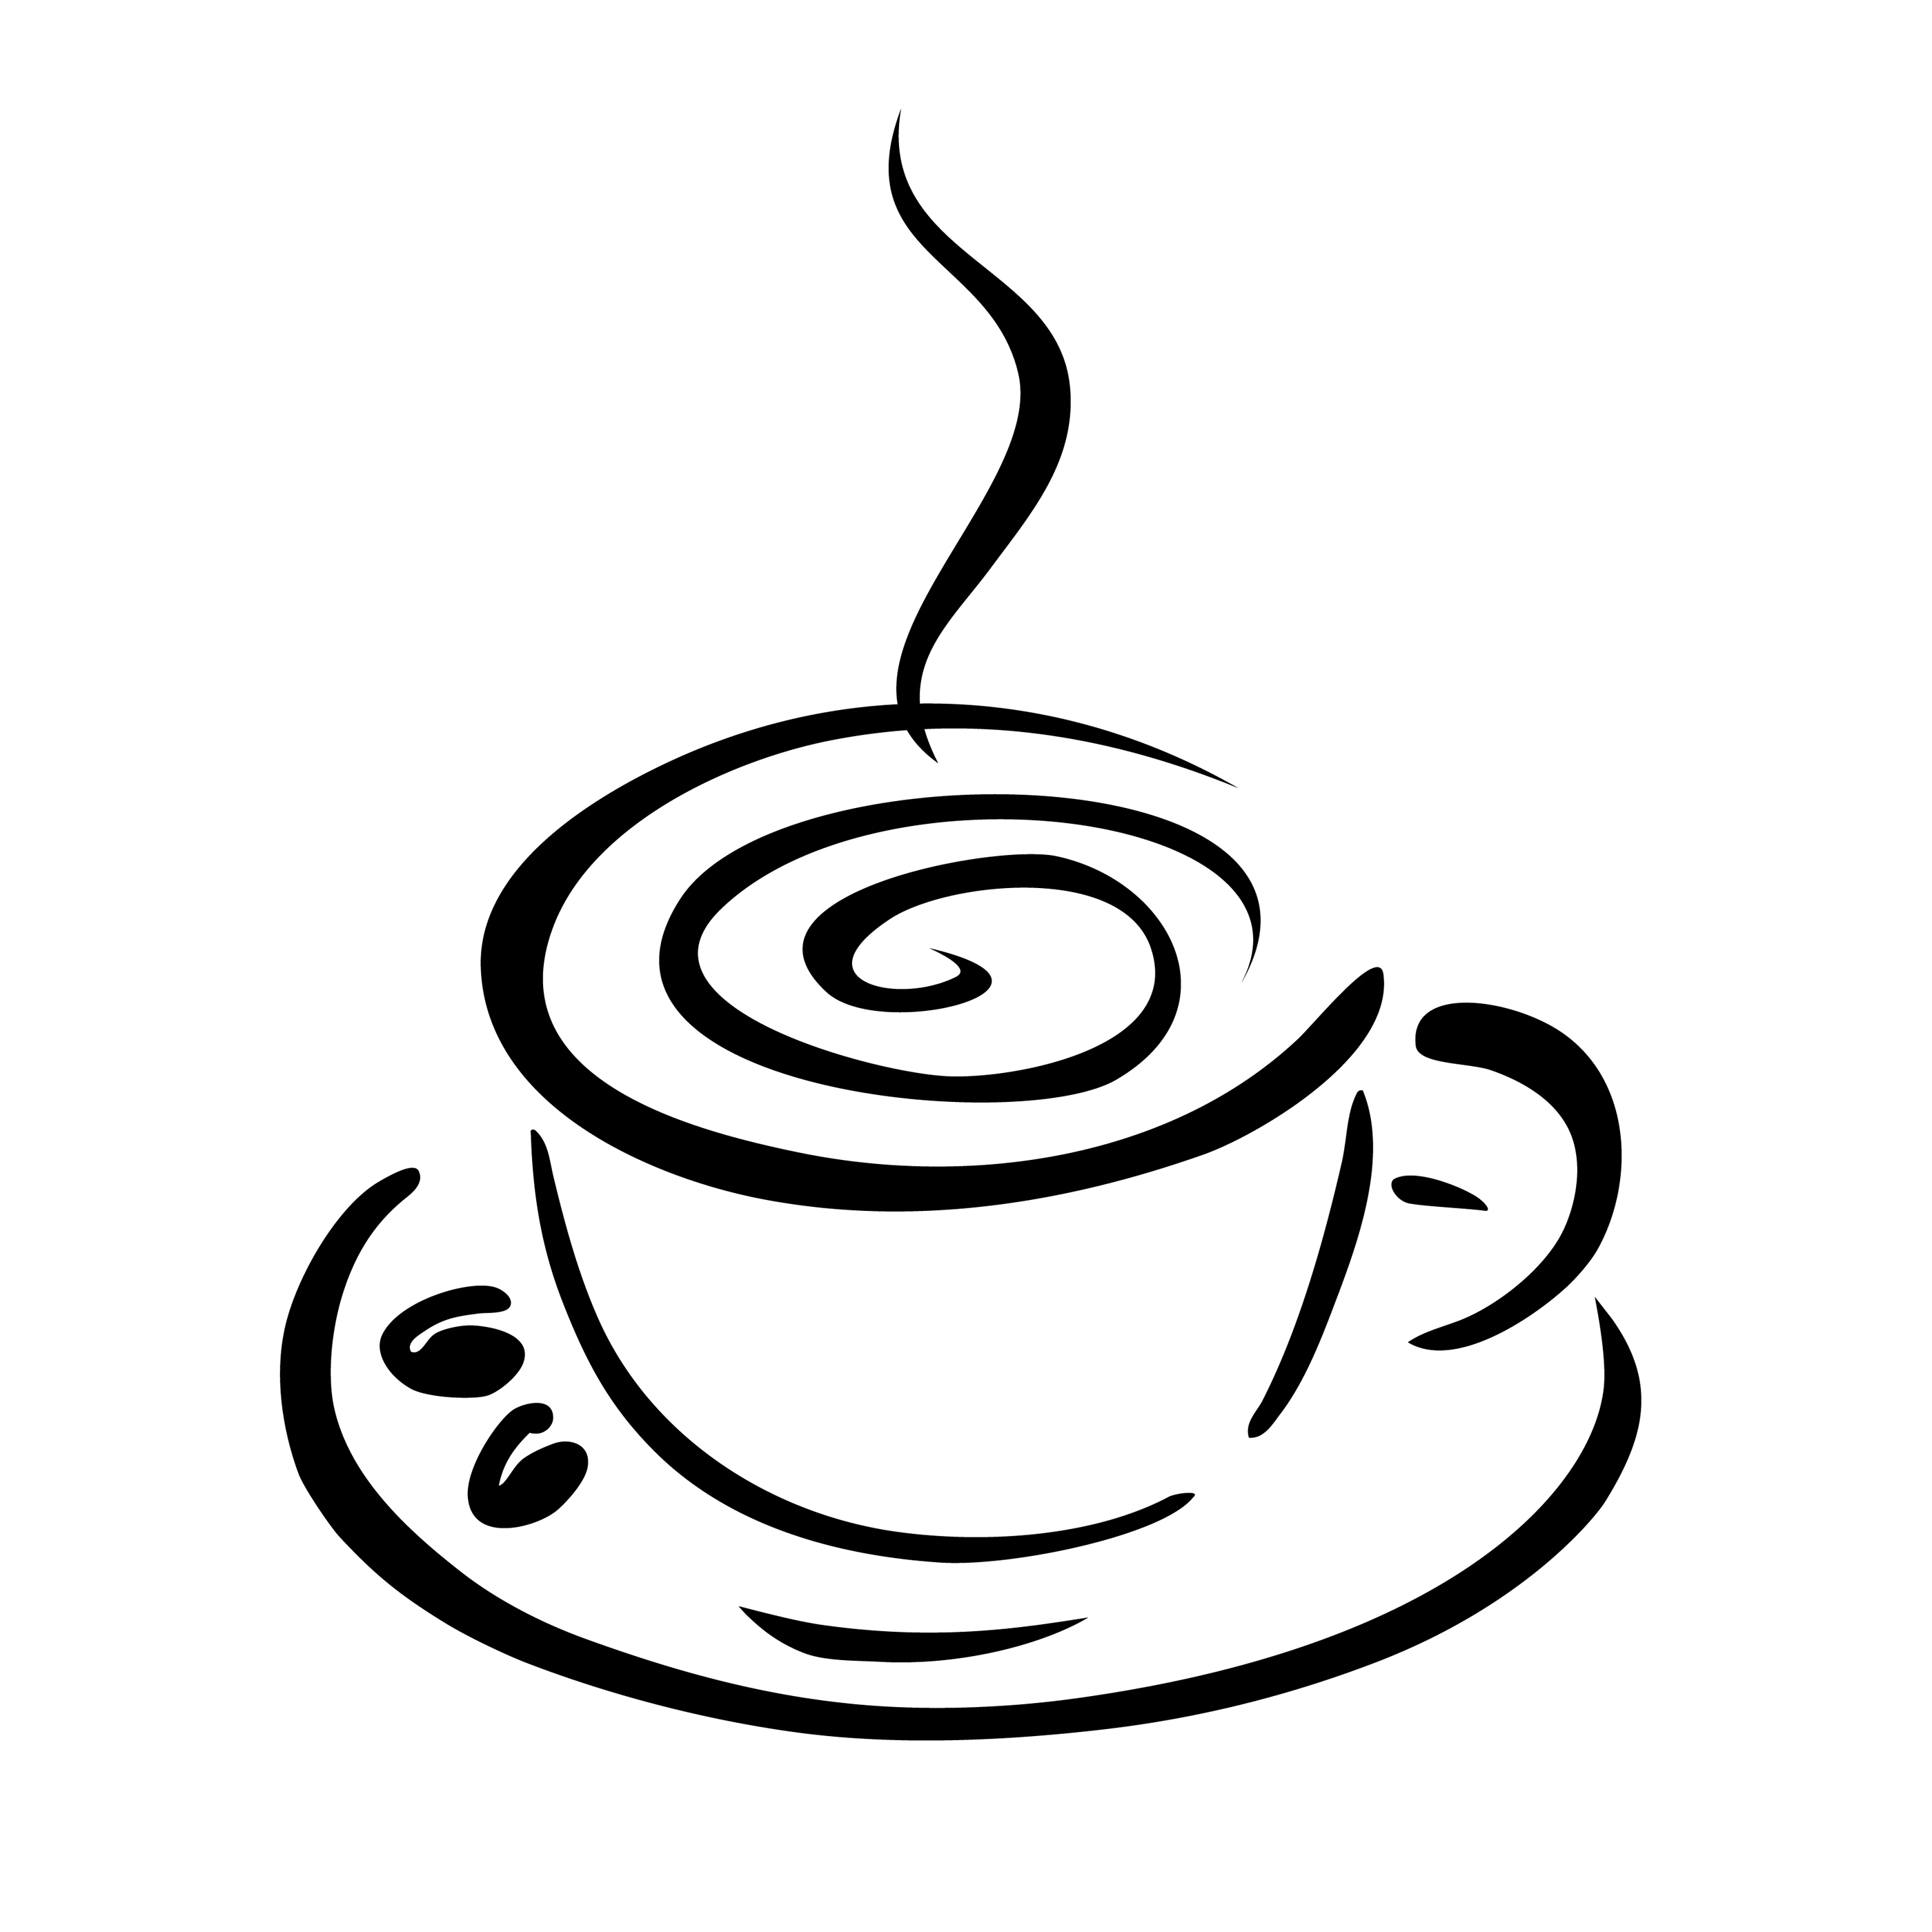 Coffee cup clip art black white free clipart images 4